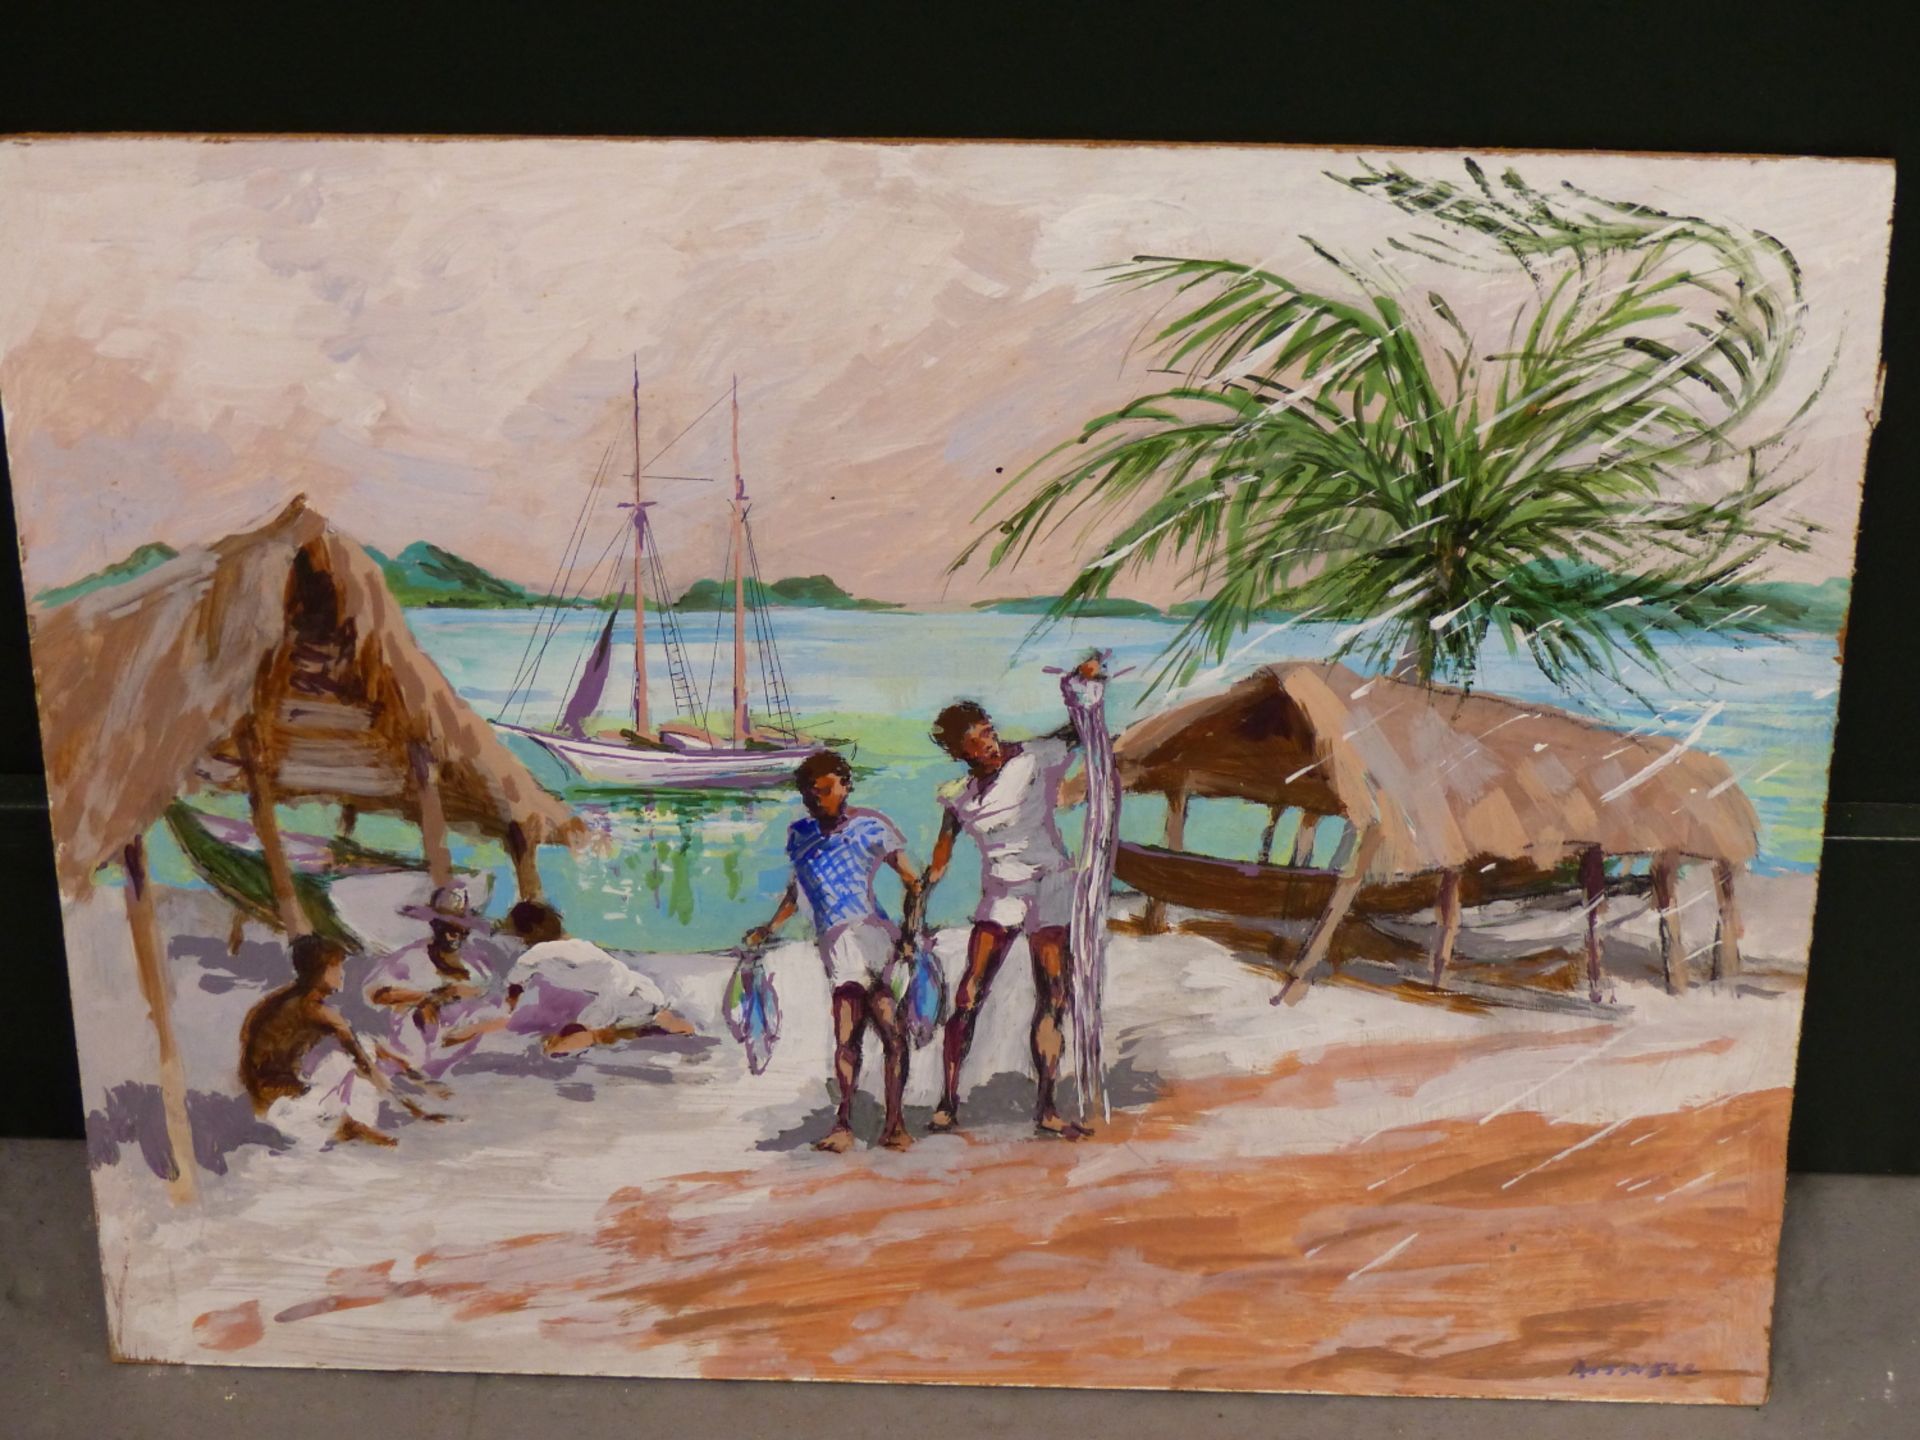 IVY T. ATTWELL (1895-1985) ARR. STUDY OF BOYS ON A BEACH WITH GRASS ROOF HUTS,SIGNED LOWER RIGHT, OI - Image 6 of 6